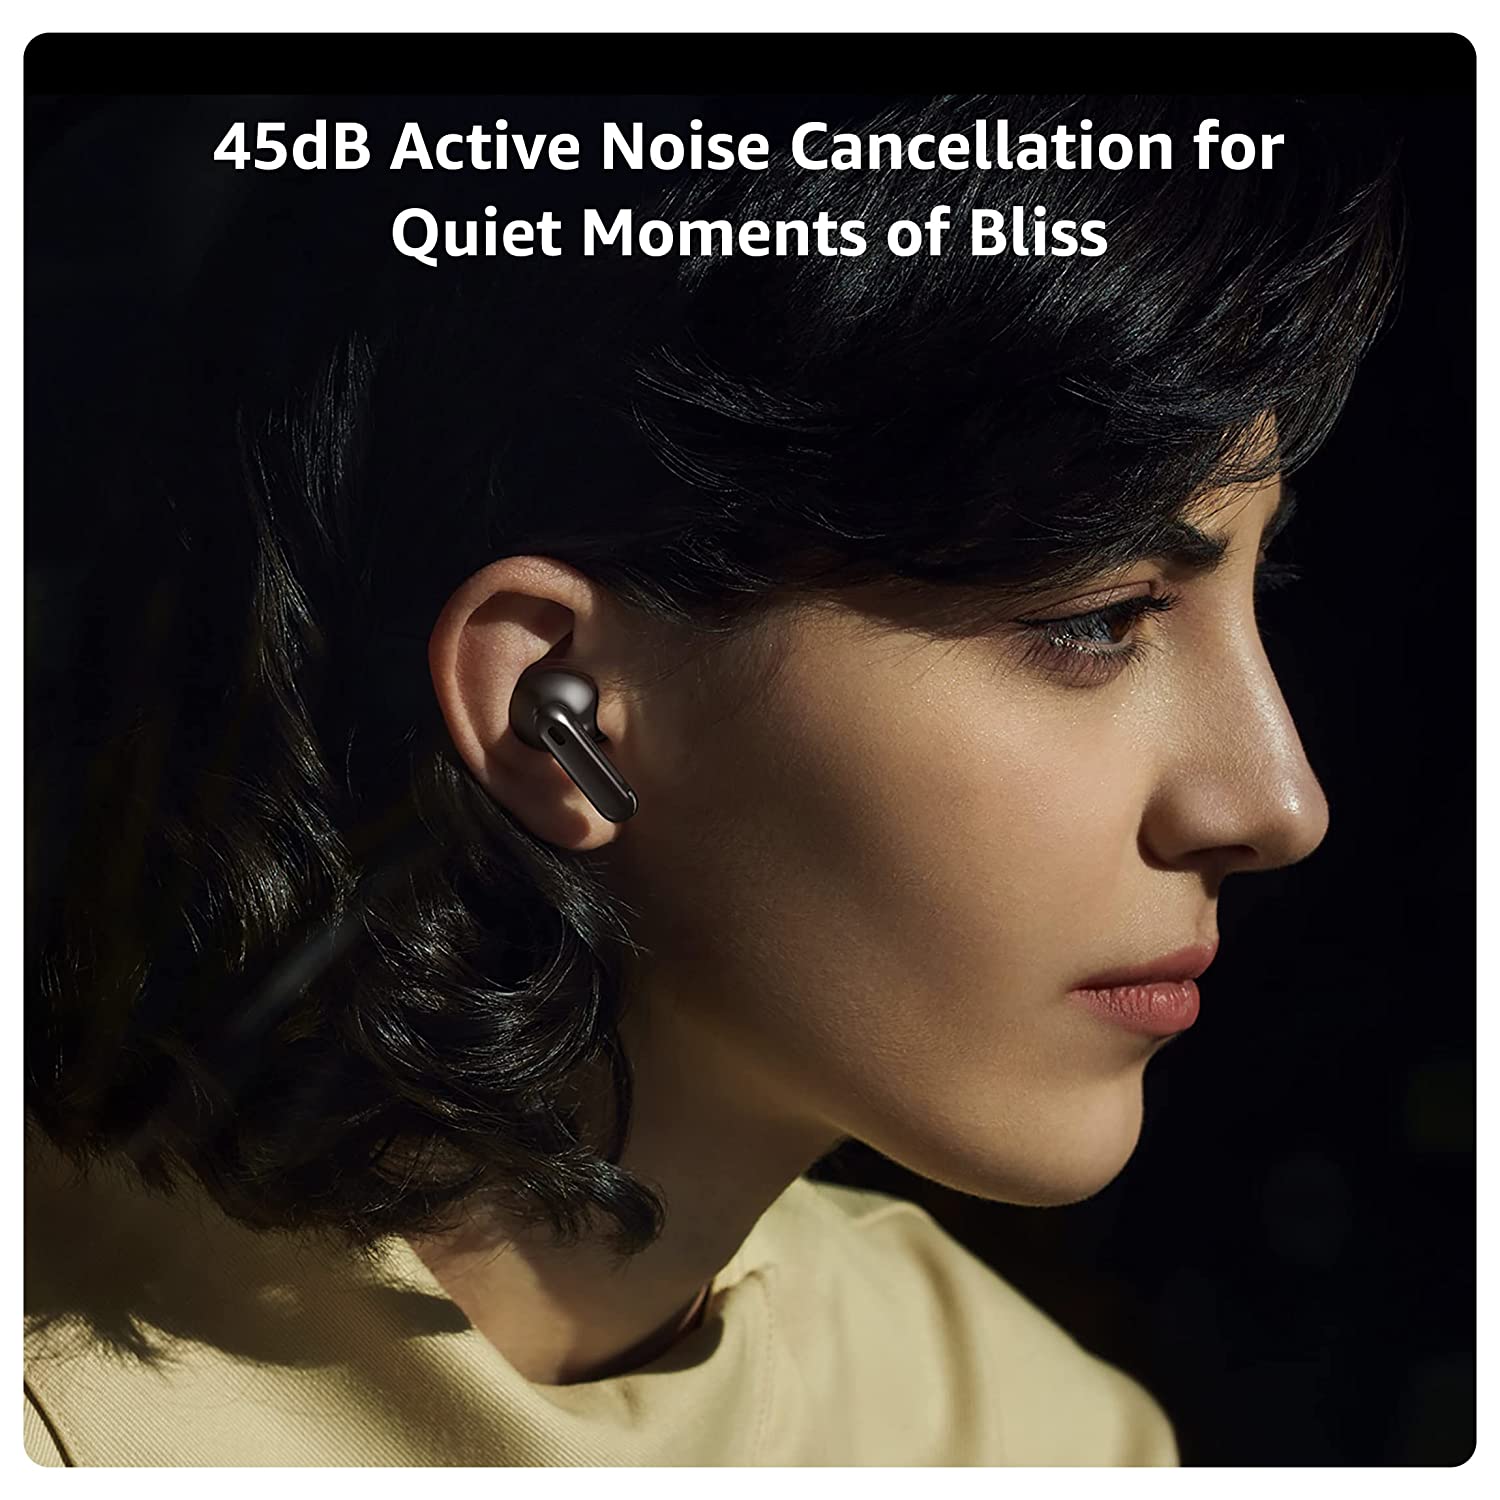 Oppo Enco X2 with Active Noise Cancellation, Triple Mic for Better